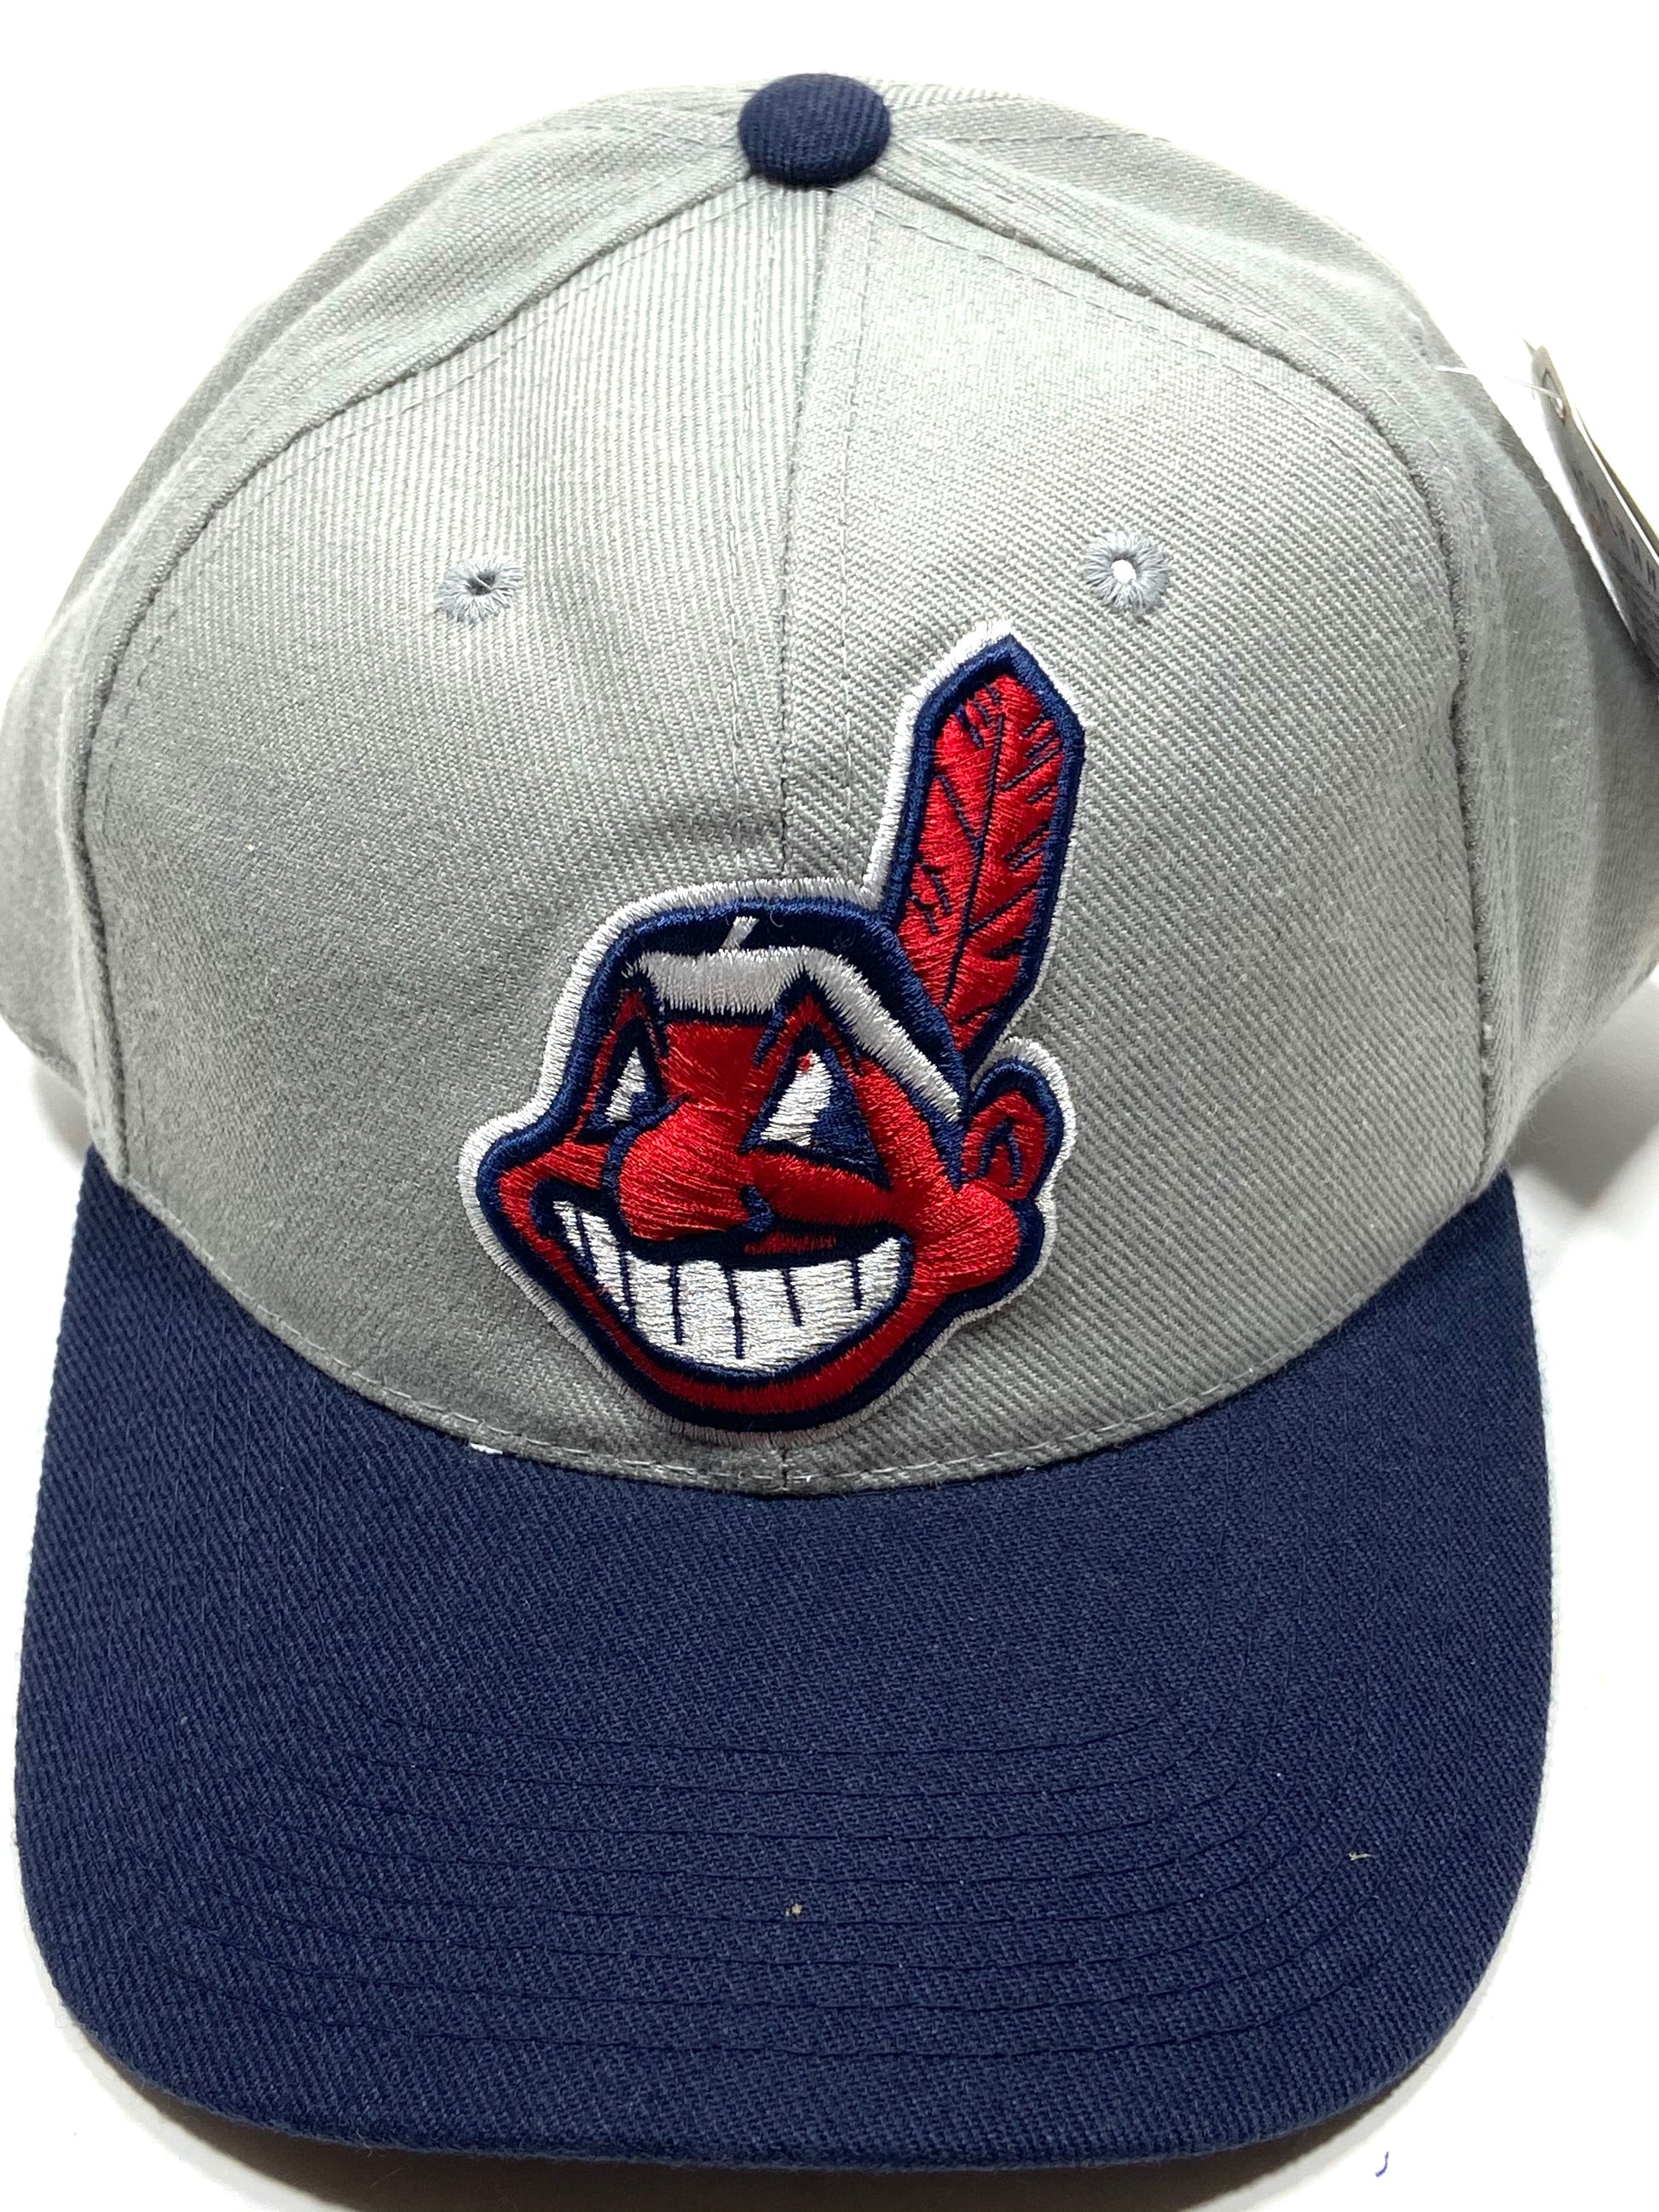 Cleveland Indians Vintage MLB Gray 20% Wool Cap by Sports Specialties –  Jeff's Vintage Treasure